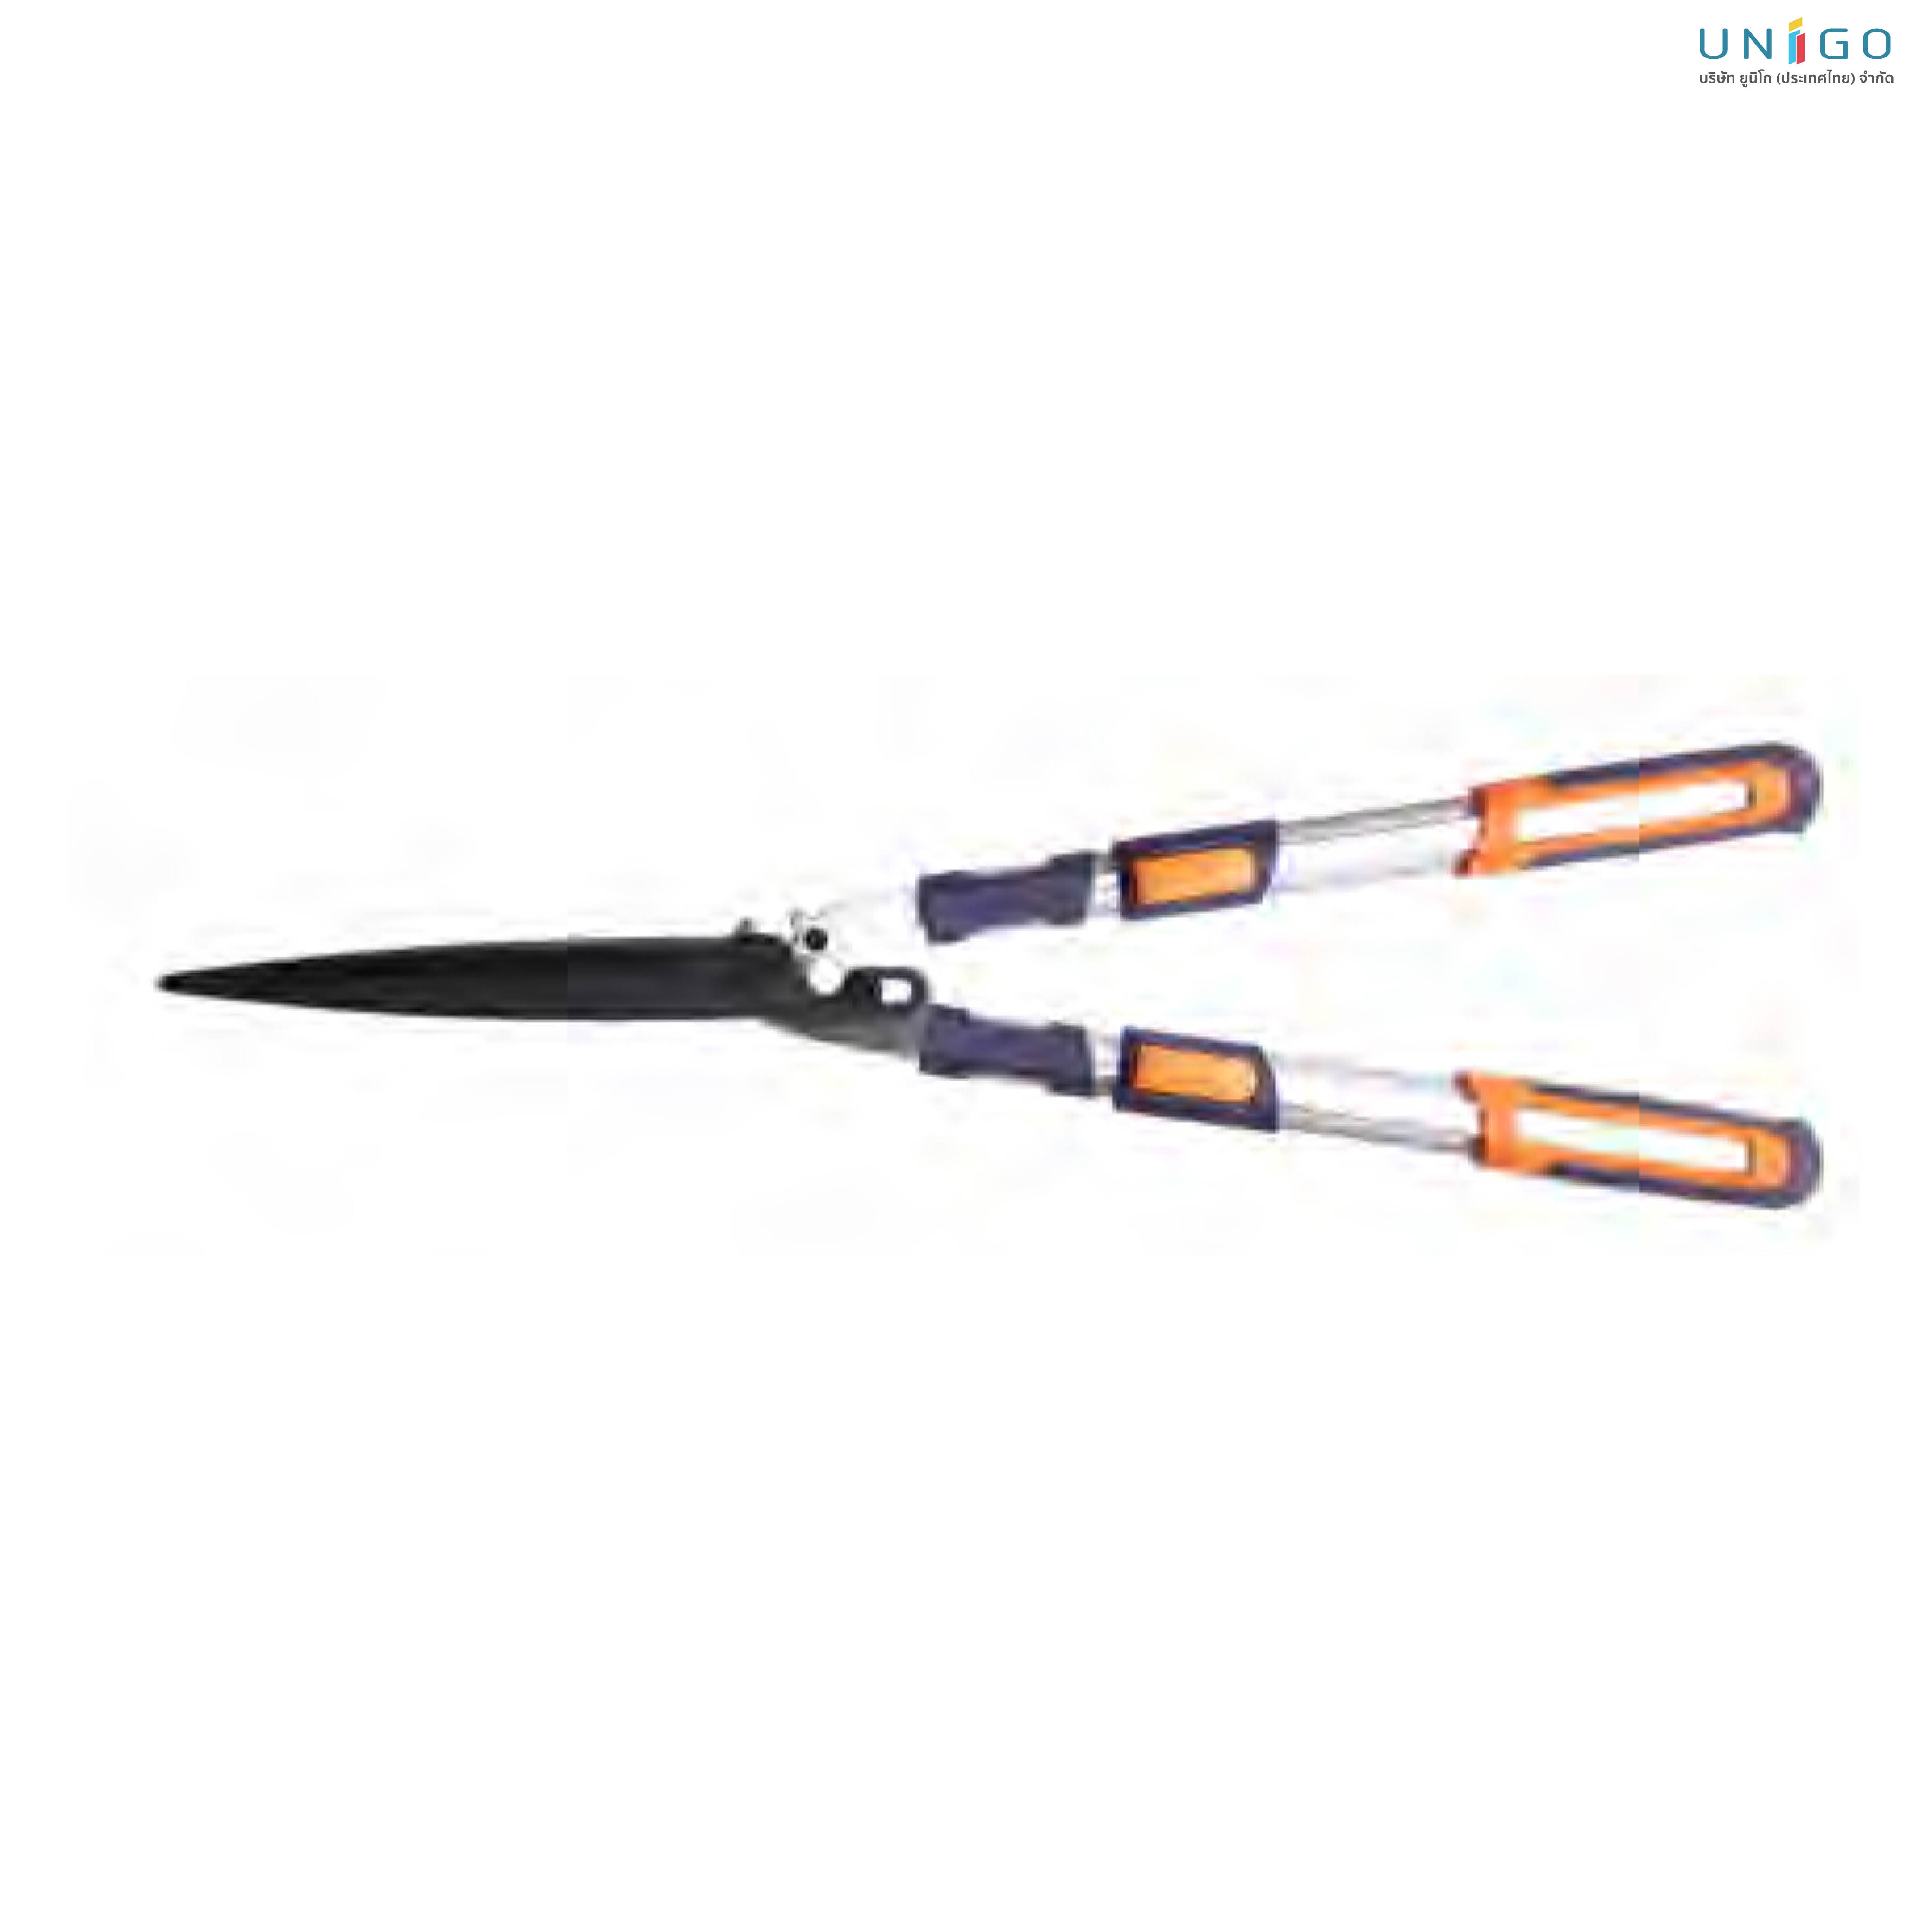 TELESCOPIC STRAIGHT BLADE GEAR ACTION HEDGE SHEARS